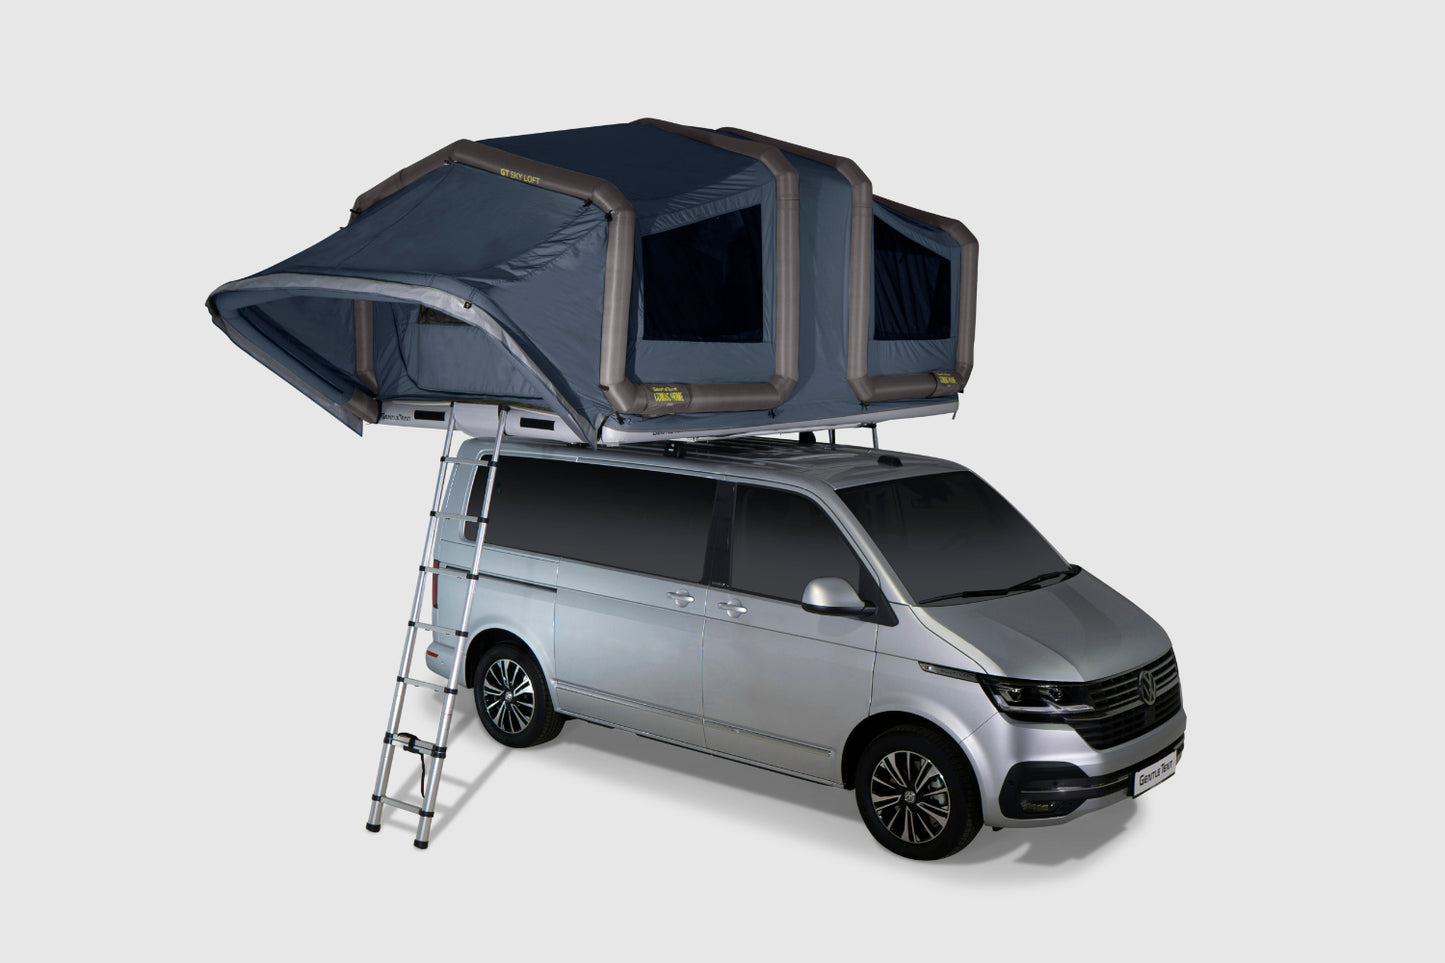 GT SKY LOFT Rooftop tent fully inflated and set up with the telescopic ladder attached.